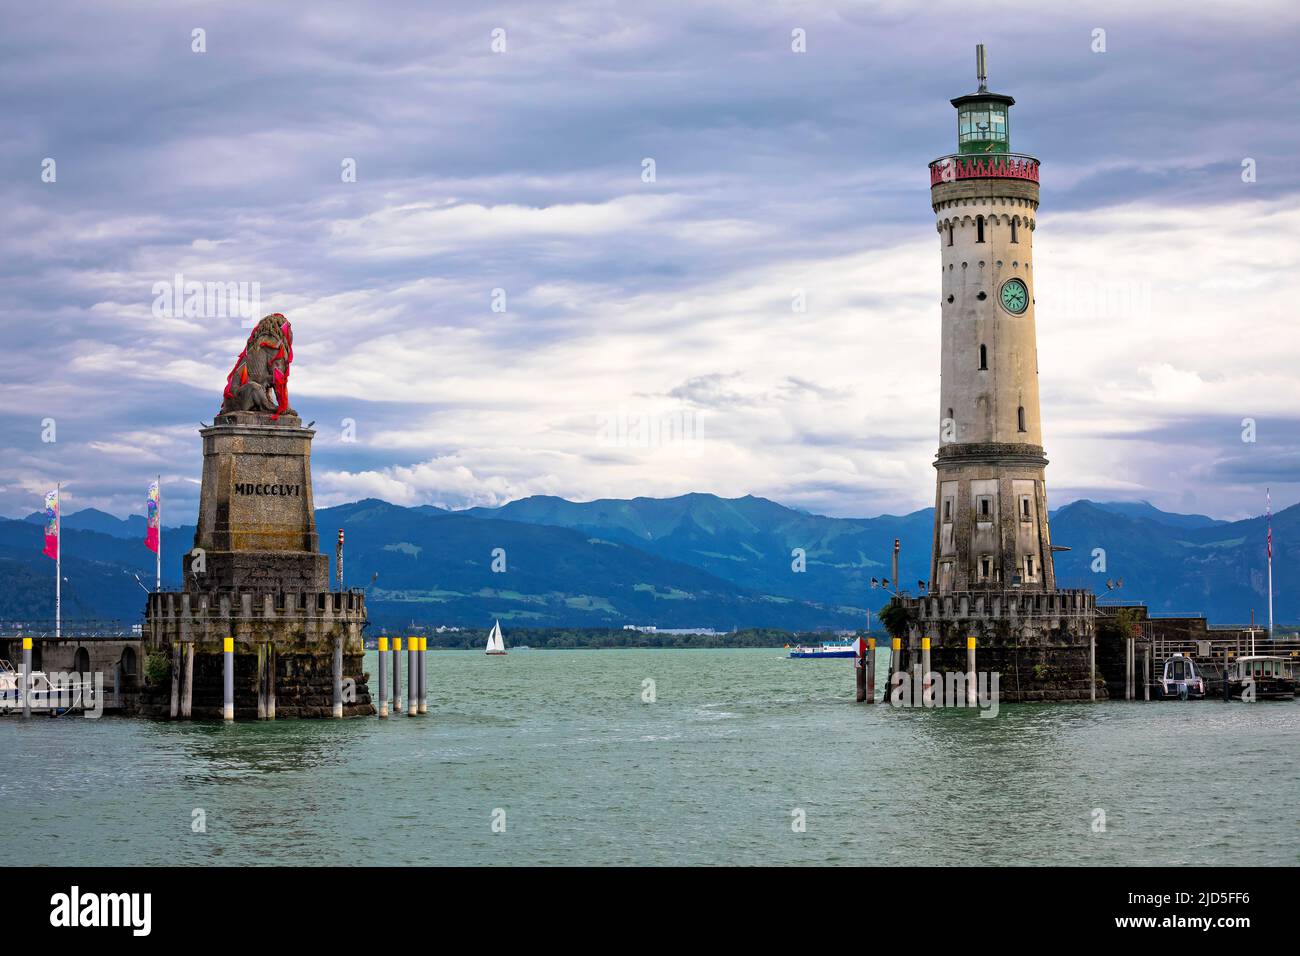 The famous harbor entrance of Lindau Bavarian Lion and New Lighthouse on Bodensee lake view, Bavaria region of Germany Stock Photo